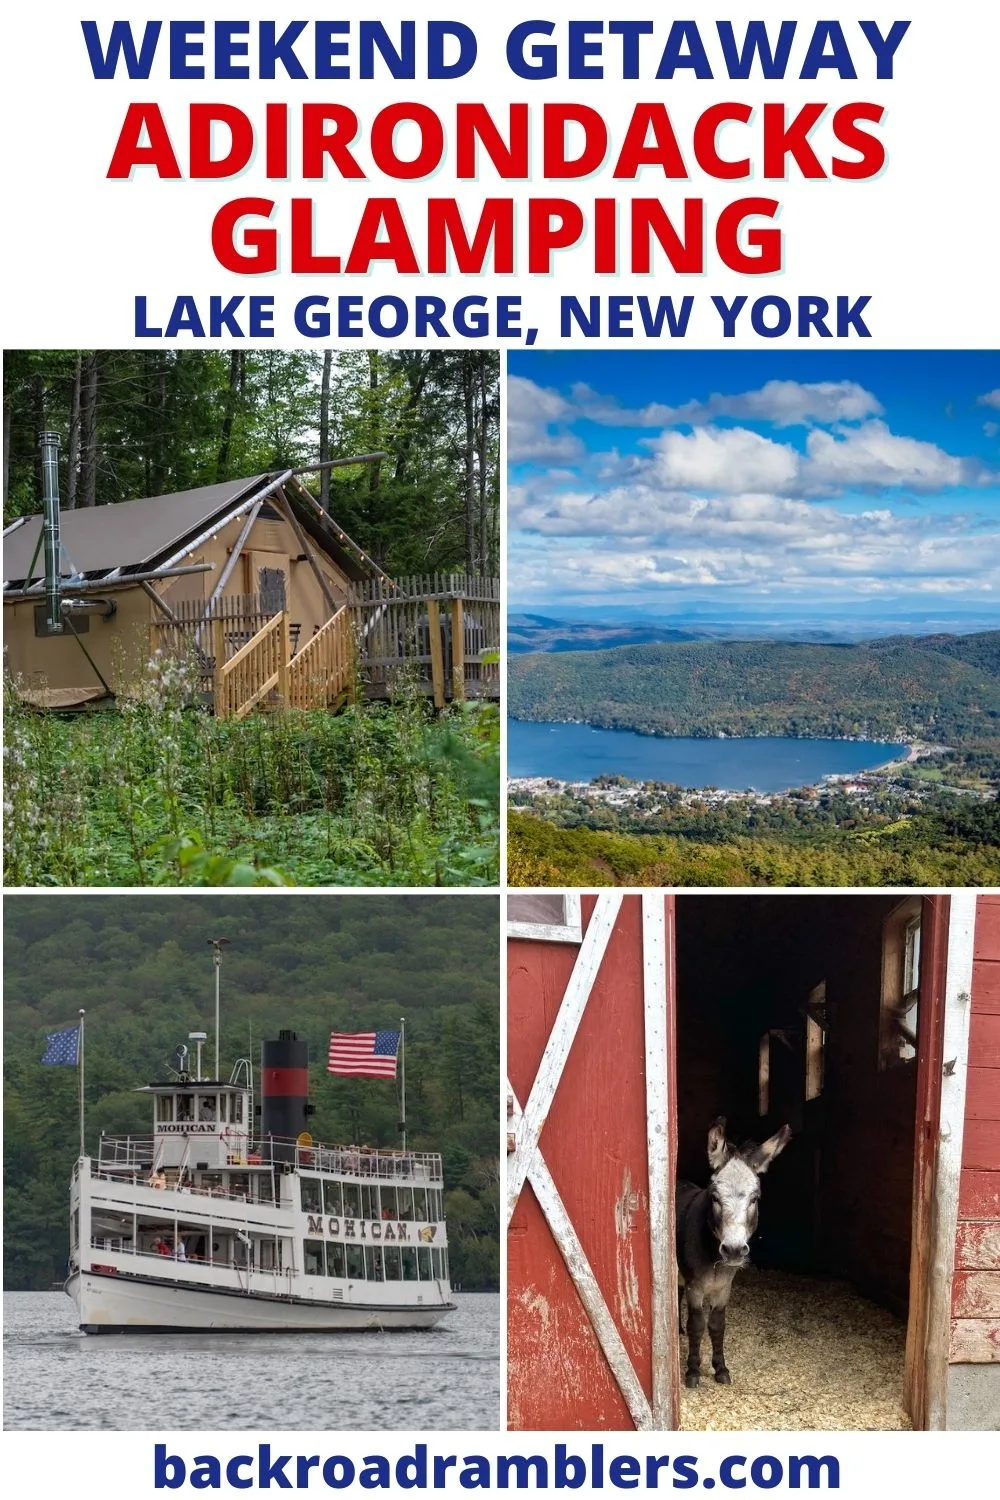 A collage of photos featuring Adirondacks glamping photos. Text overlay: Adirondack Glamping in Lake George, New York.